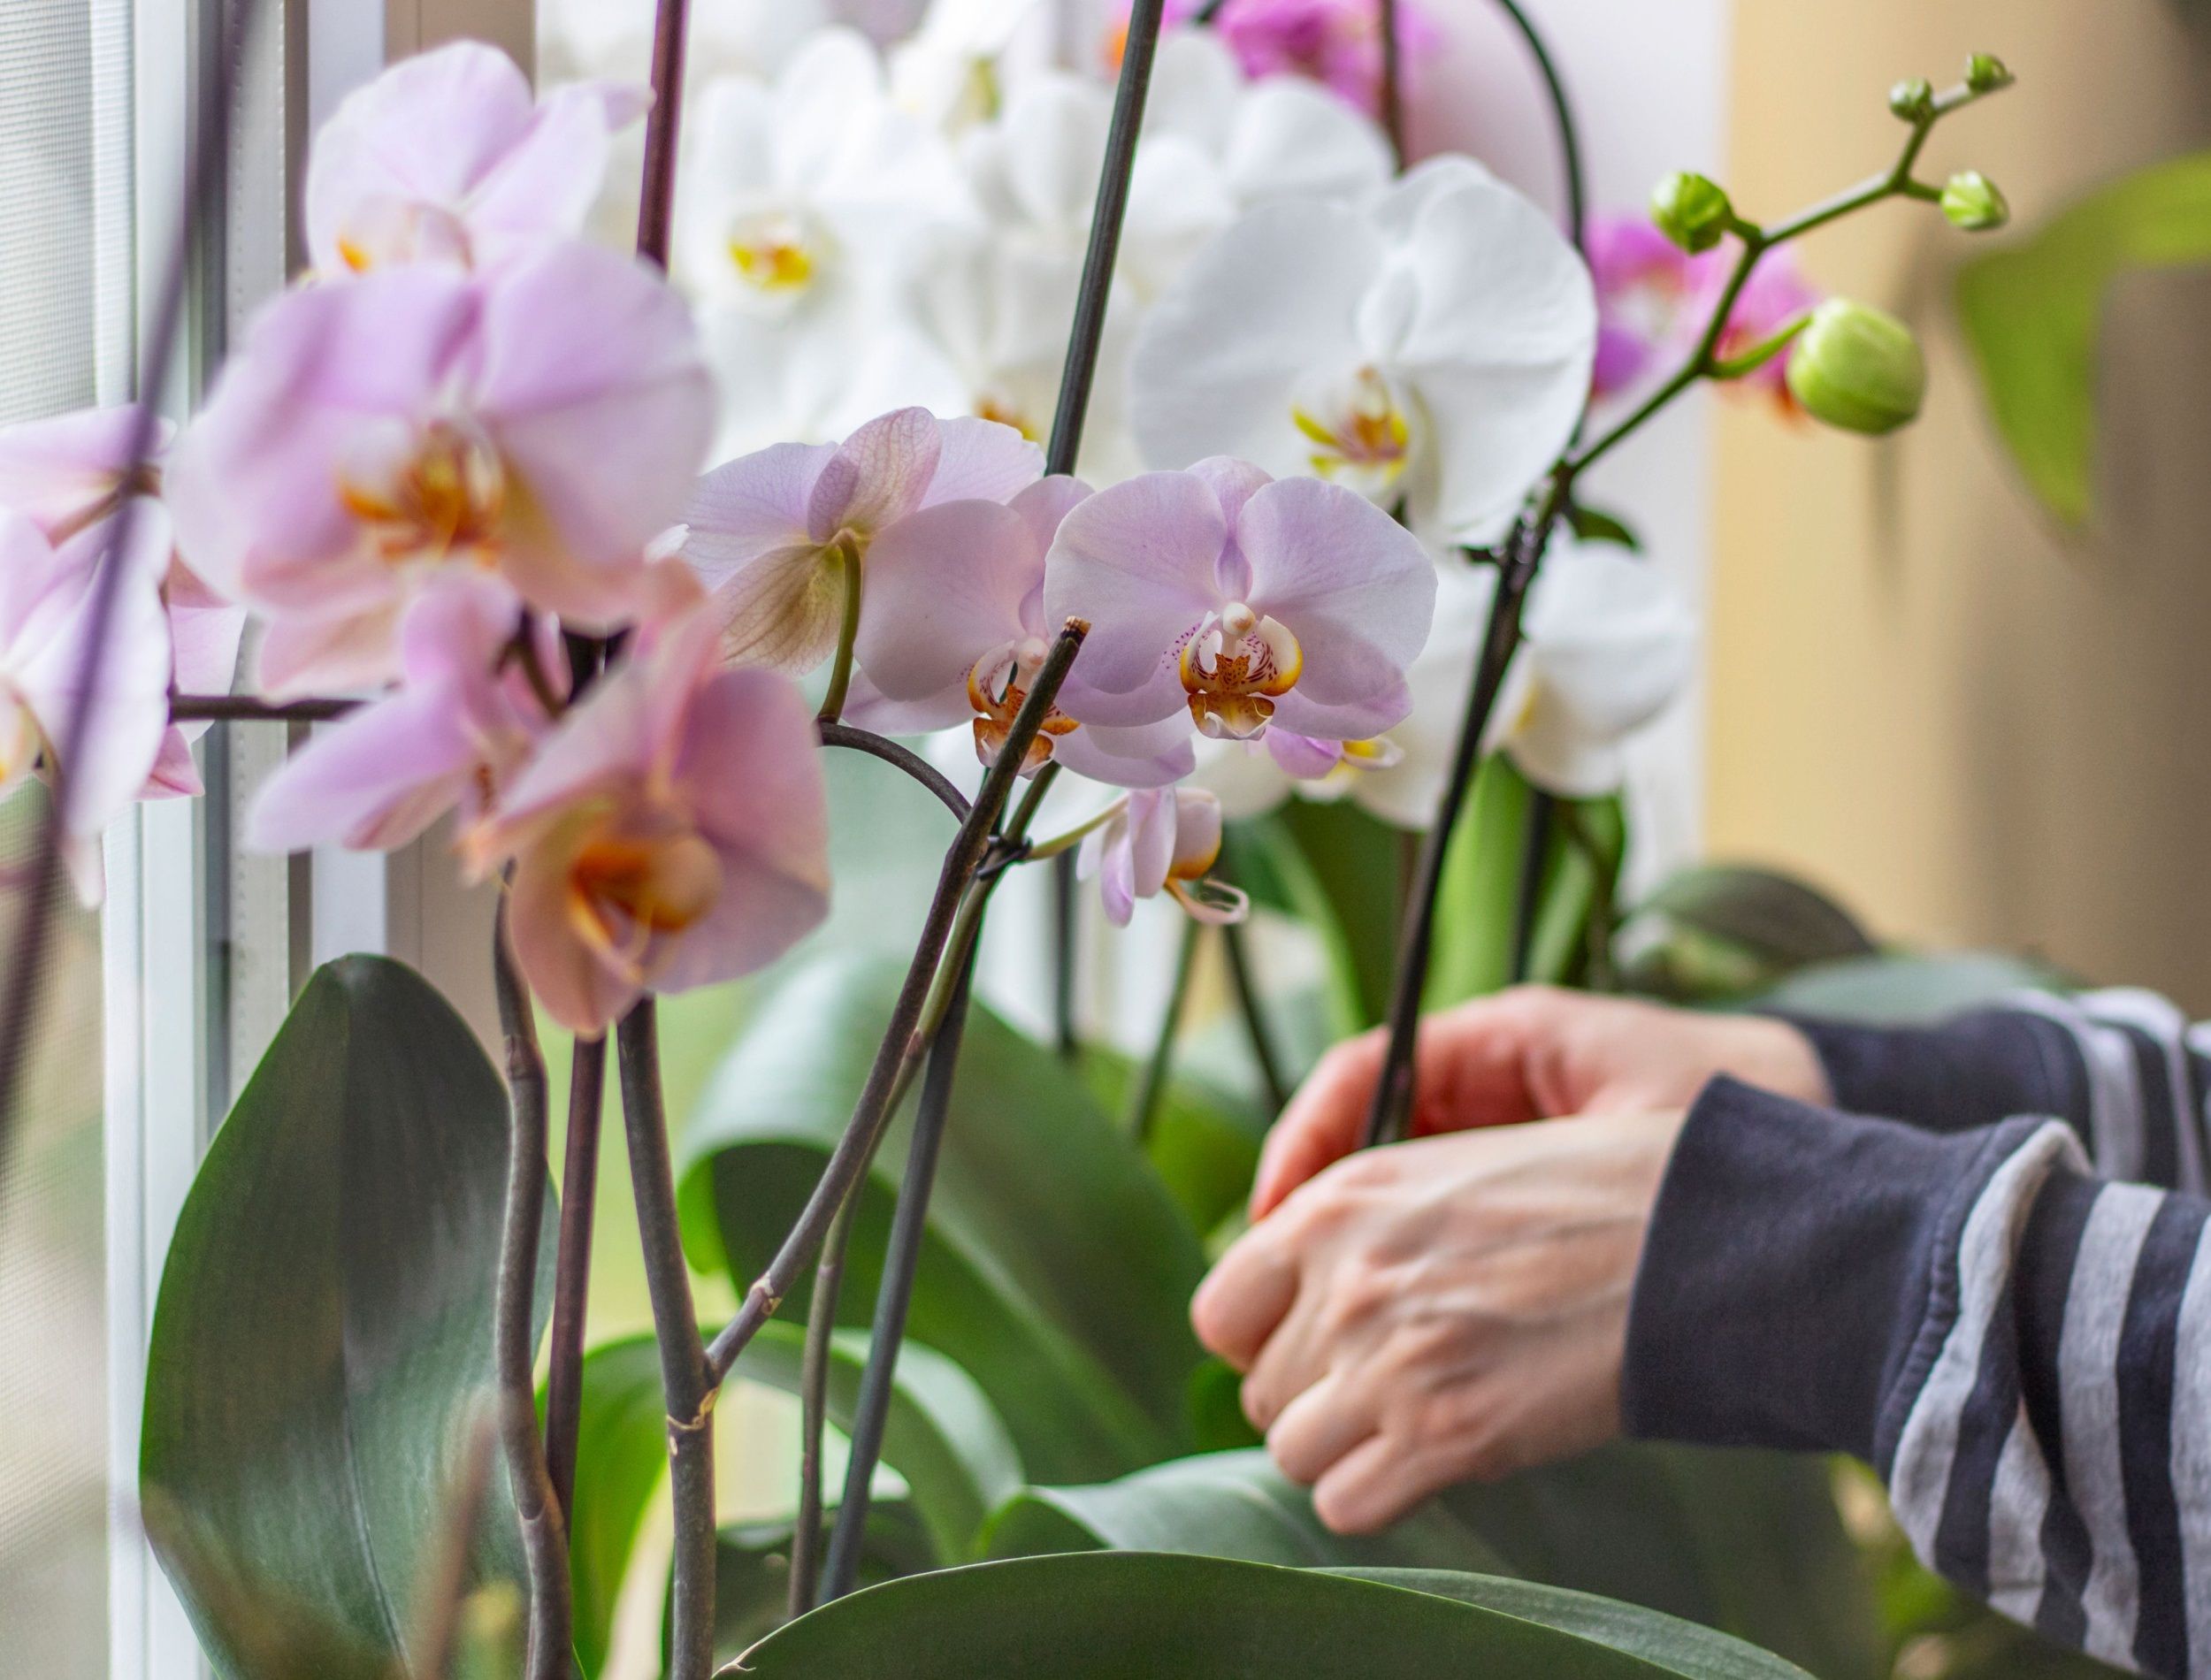 Houseplants and flowerpots care concept. Hands and orchid flowers on windowsill close up.